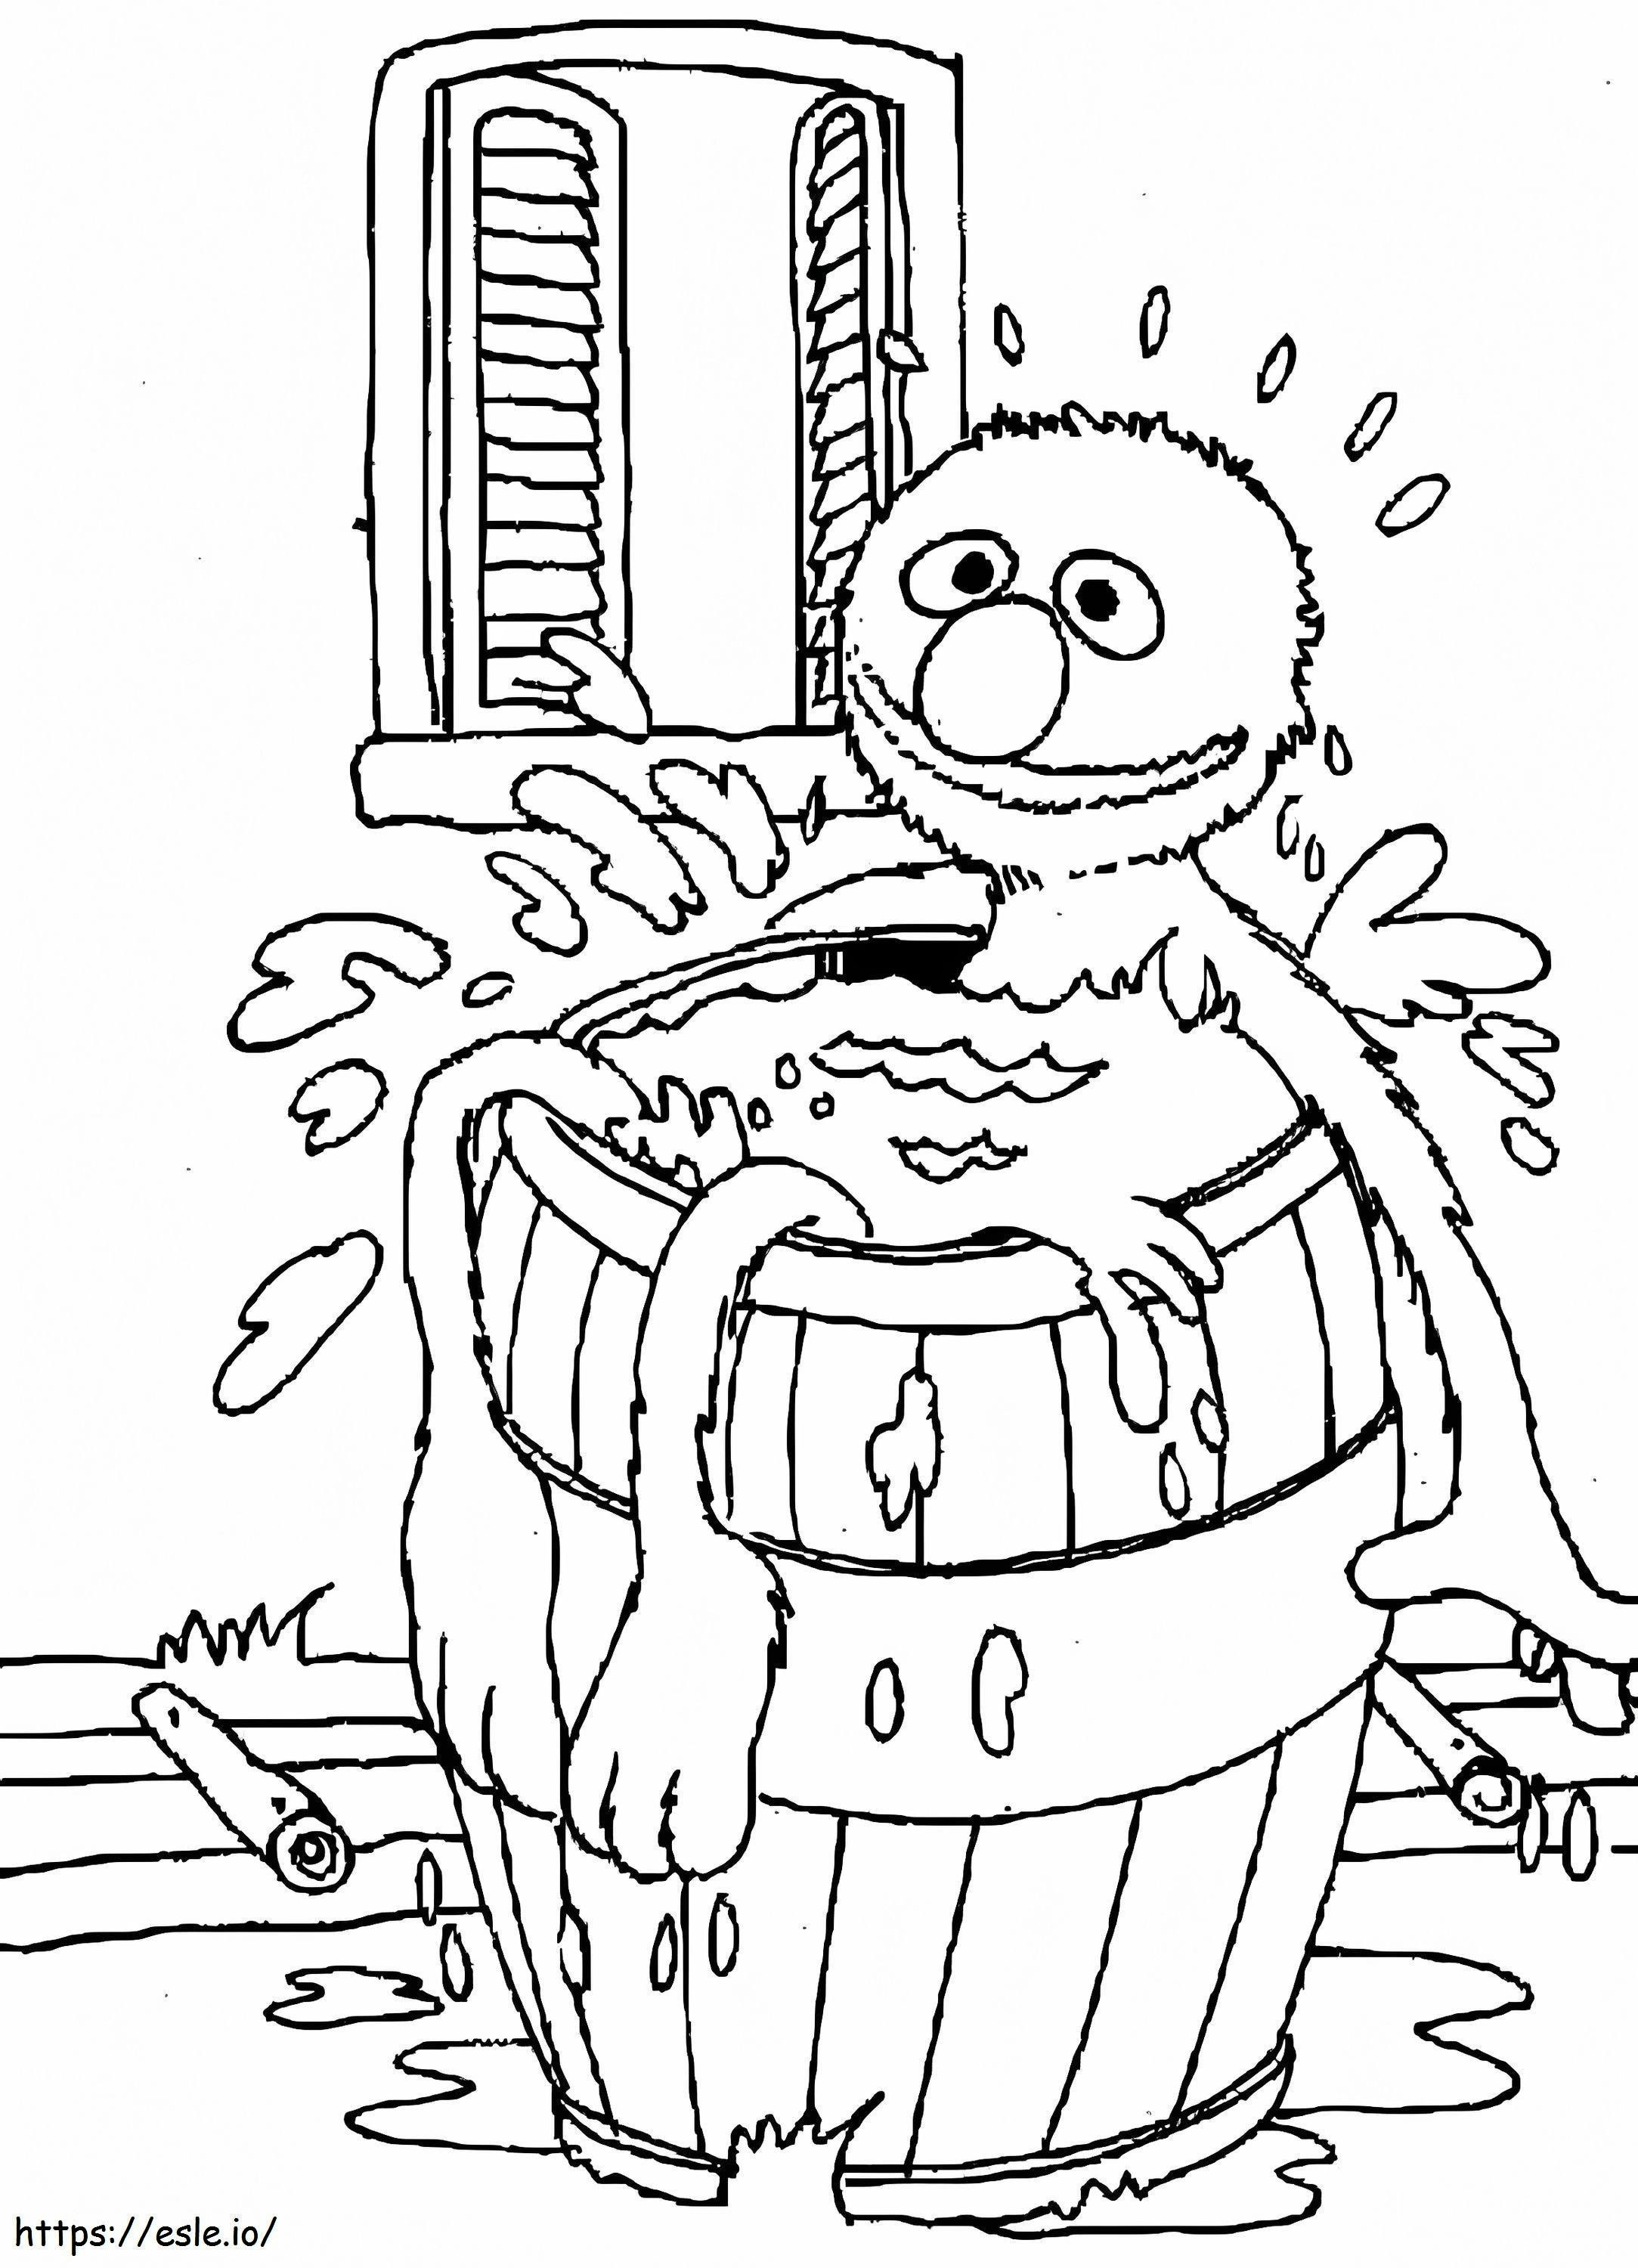 Grover In Barrel Of Water coloring page